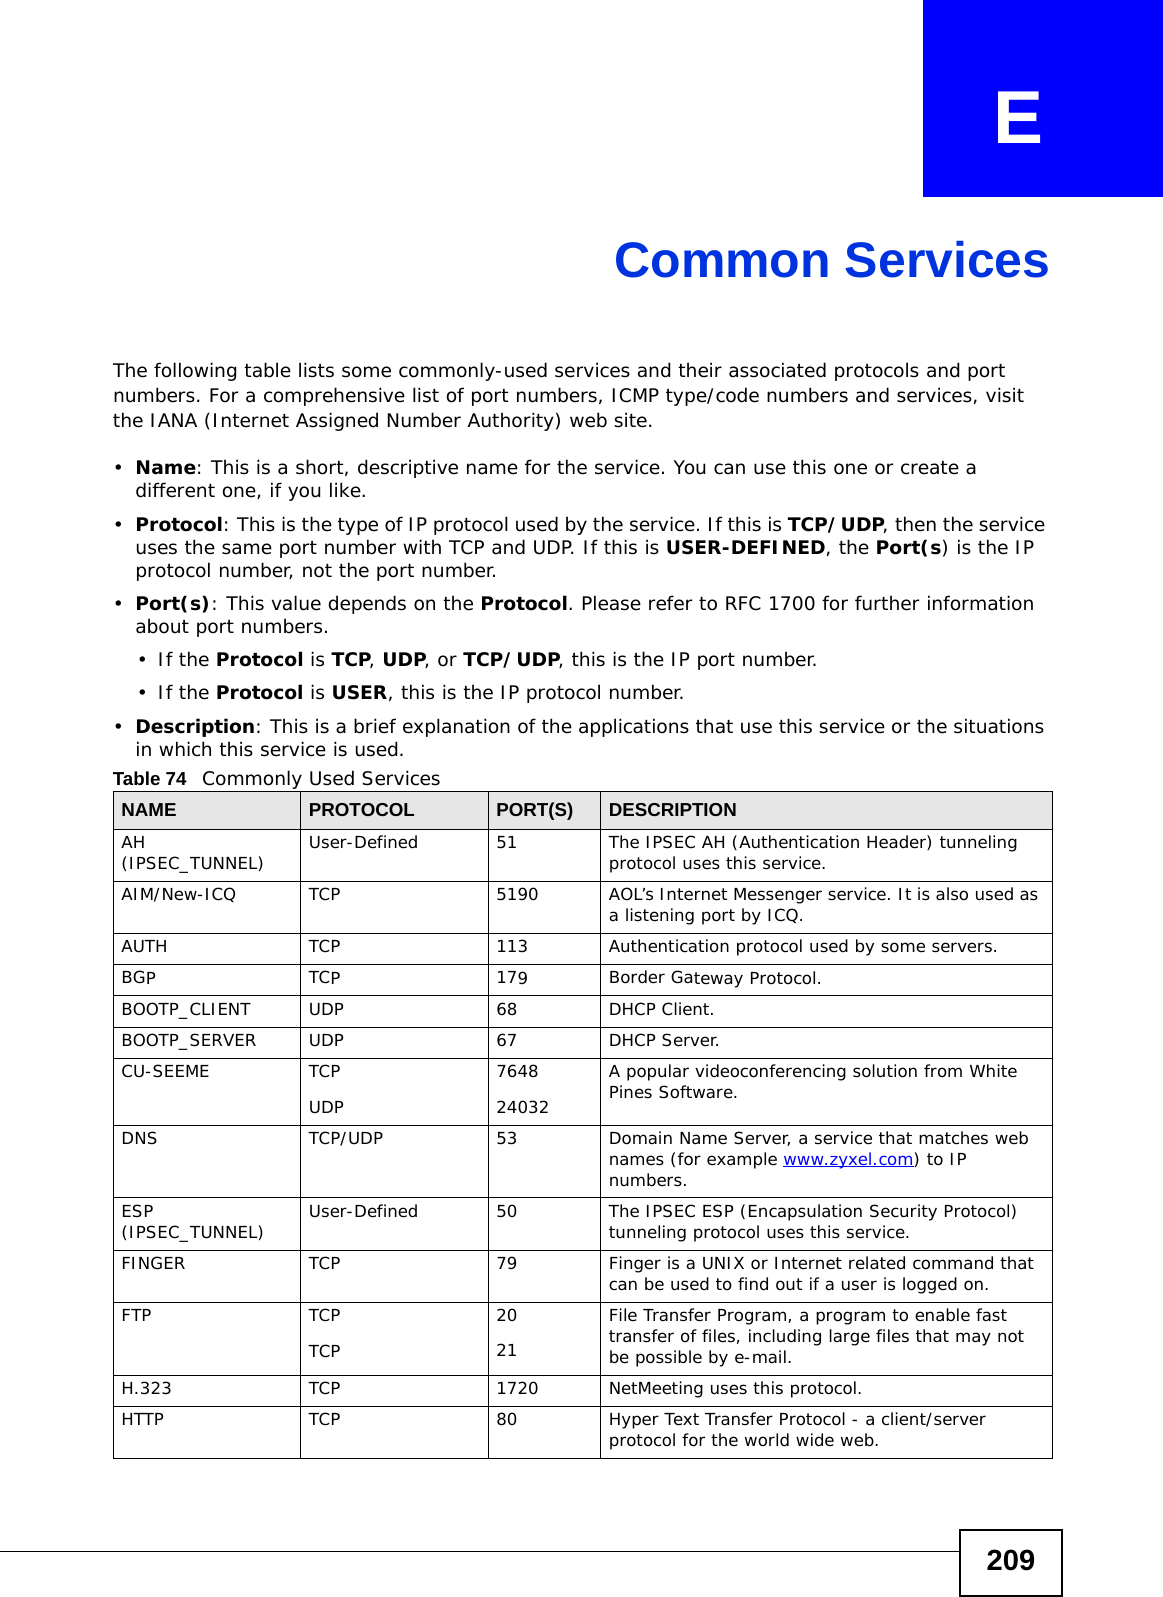 209APPENDIX   ECommon ServicesThe following table lists some commonly-used services and their associated protocols and port numbers. For a comprehensive list of port numbers, ICMP type/code numbers and services, visit the IANA (Internet Assigned Number Authority) web site. •Name: This is a short, descriptive name for the service. You can use this one or create a different one, if you like.•Protocol: This is the type of IP protocol used by the service. If this is TCP/UDP, then the service uses the same port number with TCP and UDP. If this is USER-DEFINED, the Port(s) is the IP protocol number, not the port number.•Port(s): This value depends on the Protocol. Please refer to RFC 1700 for further information about port numbers.•If the Protocol is TCP, UDP, or TCP/UDP, this is the IP port number.•If the Protocol is USER, this is the IP protocol number.•Description: This is a brief explanation of the applications that use this service or the situations in which this service is used.Table 74   Commonly Used ServicesNAME PROTOCOL PORT(S) DESCRIPTIONAH (IPSEC_TUNNEL) User-Defined 51 The IPSEC AH (Authentication Header) tunneling protocol uses this service.AIM/New-ICQ TCP5190 AOL’s Internet Messenger service. It is also used as a listening port by ICQ.AUTH TCP113Authentication protocol used by some servers.BGPTCP179Border Gateway Protocol.BOOTP_CLIENT UDP68 DHCP Client.BOOTP_SERVER UDP67 DHCP Server.CU-SEEME TCPUDP764824032A popular videoconferencing solution from White Pines Software.DNS TCP/UDP 53 Domain Name Server, a service that matches web names (for example www.zyxel.com) to IP numbers.ESP (IPSEC_TUNNEL) User-Defined 50 The IPSEC ESP (Encapsulation Security Protocol) tunneling protocol uses this service.FINGER TCP79 Finger is a UNIX or Internet related command that can be used to find out if a user is logged on.FTPTCPTCP2021File Transfer Program, a program to enable fast transfer of files, including large files that may not be possible by e-mail.H.323 TCP1720 NetMeeting uses this protocol.HTTP TCP80 Hyper Text Transfer Protocol - a client/server protocol for the world wide web.